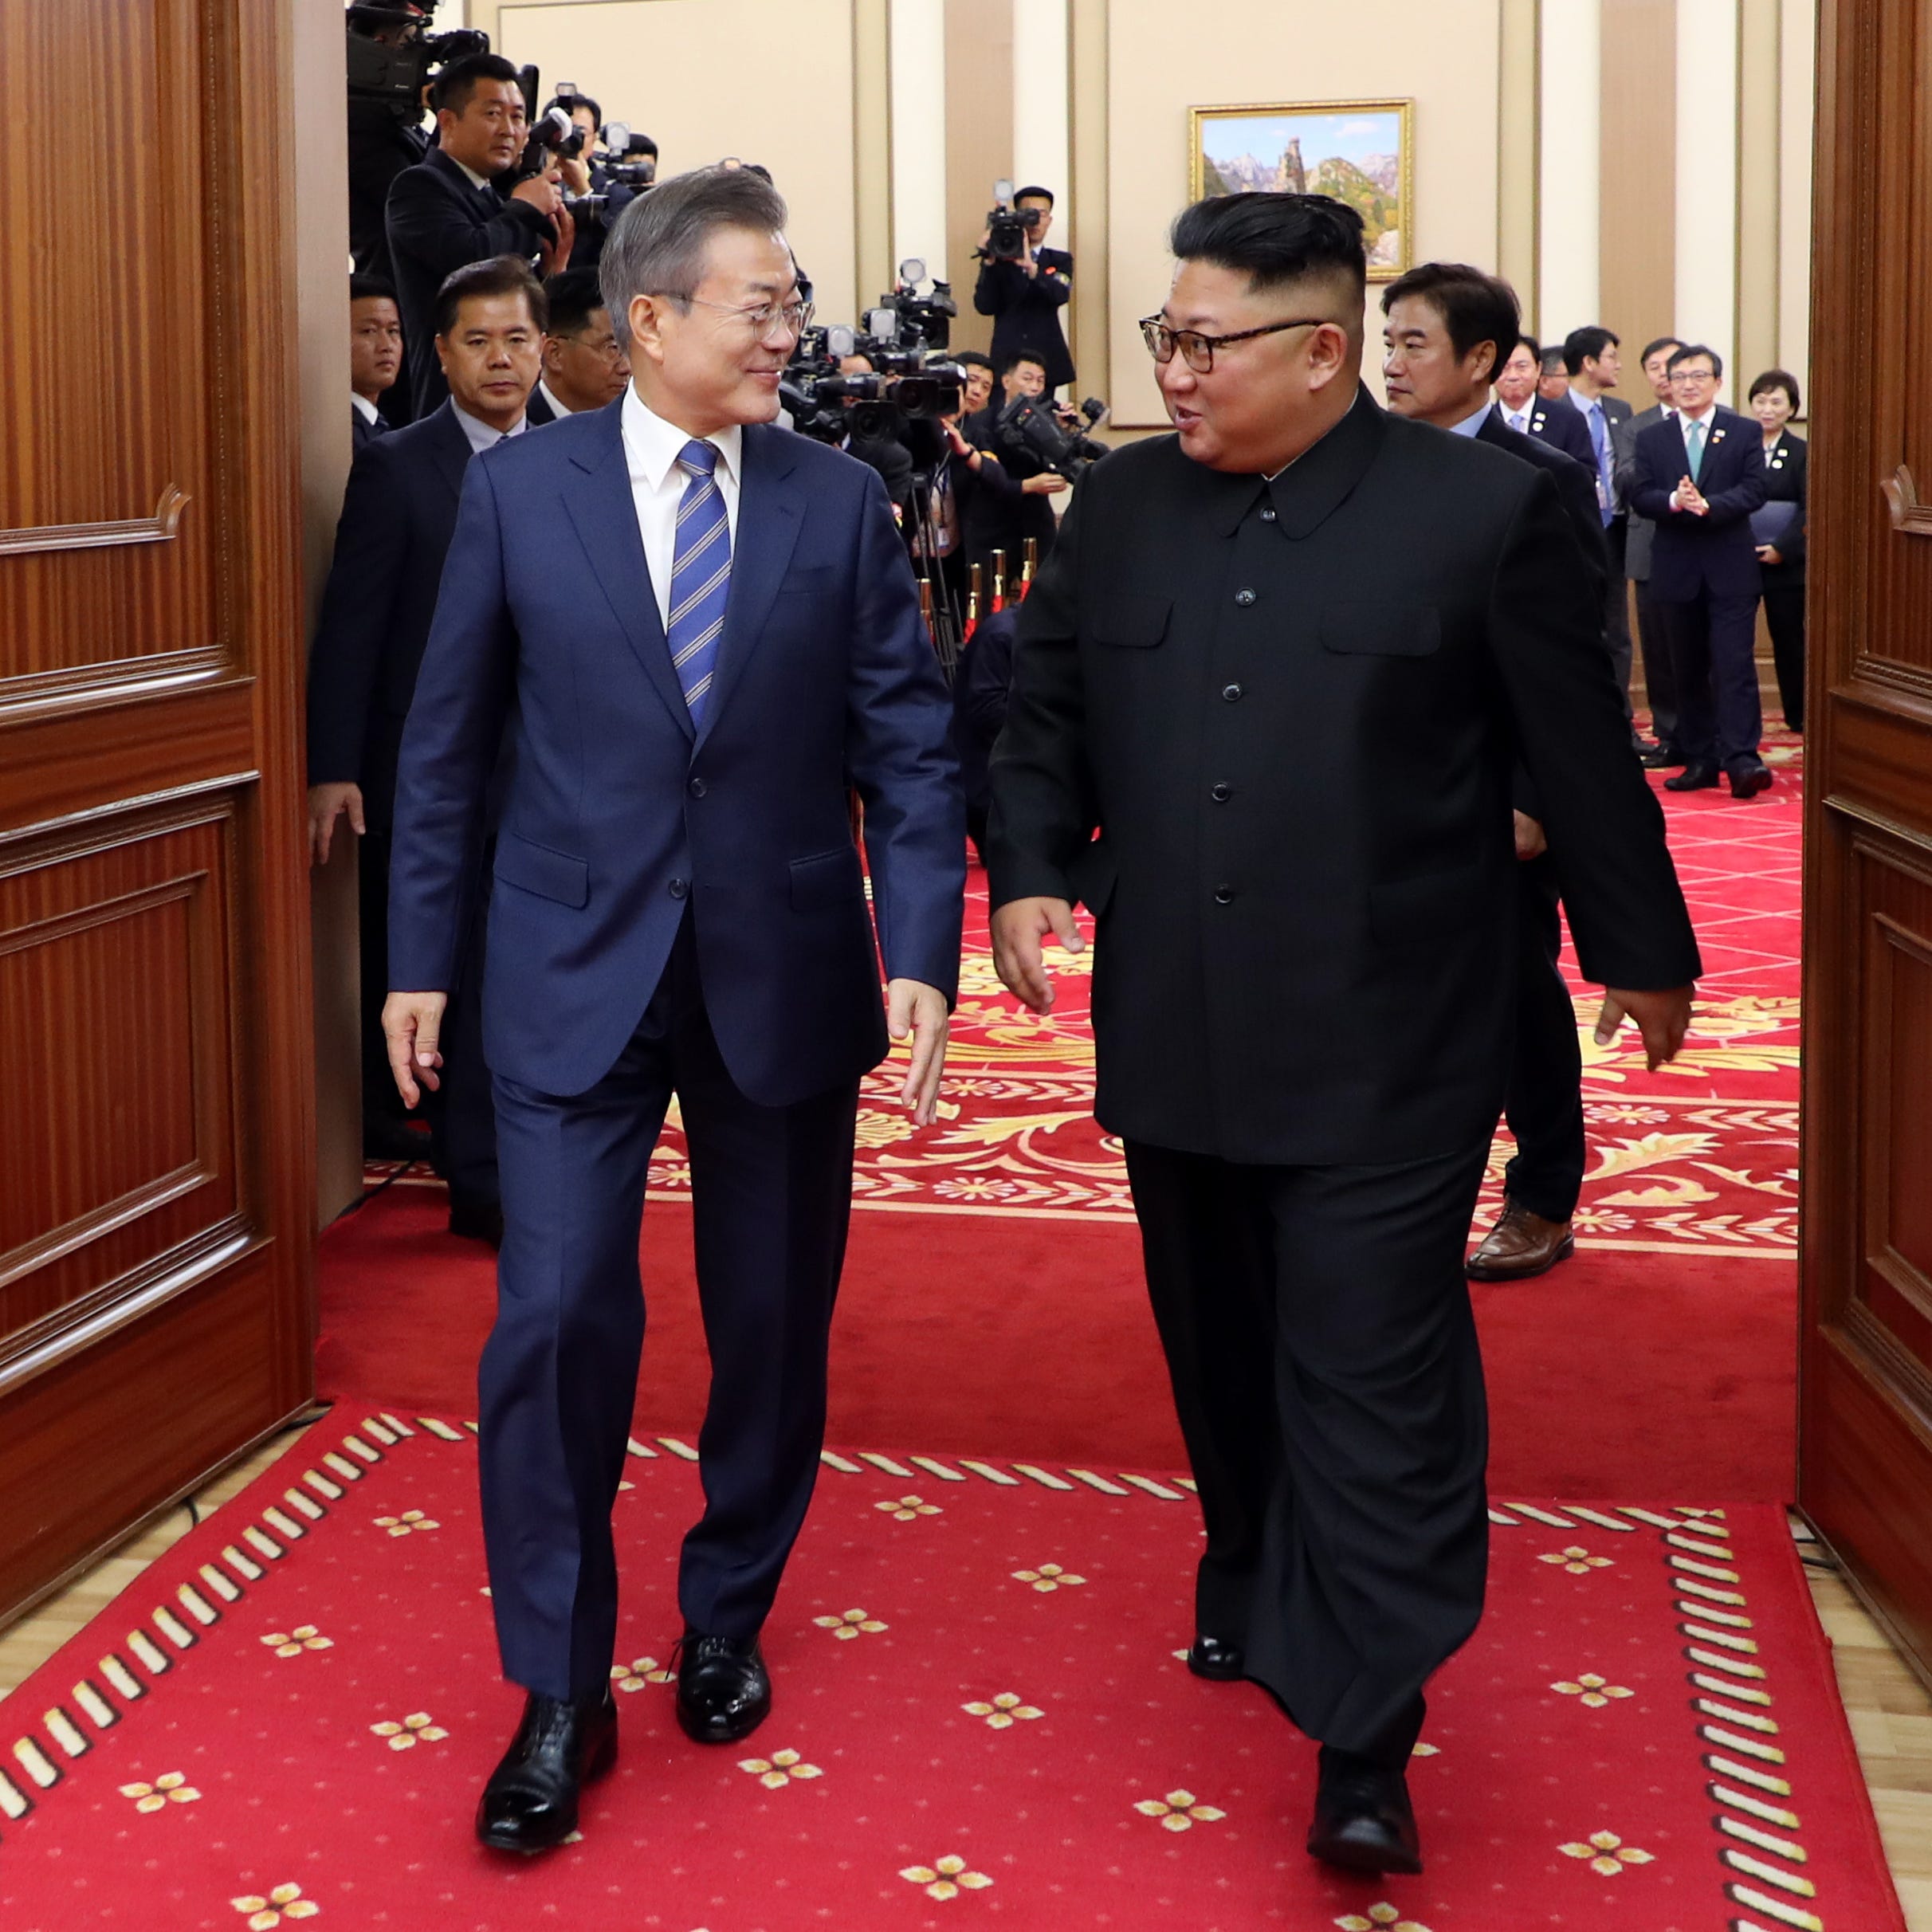 South Korean president Moon Jae-in (L) talks with North Korean leader Kim Jong Un as they leave after a press conference in Pyongyang, North Korea, 19 September 2018.